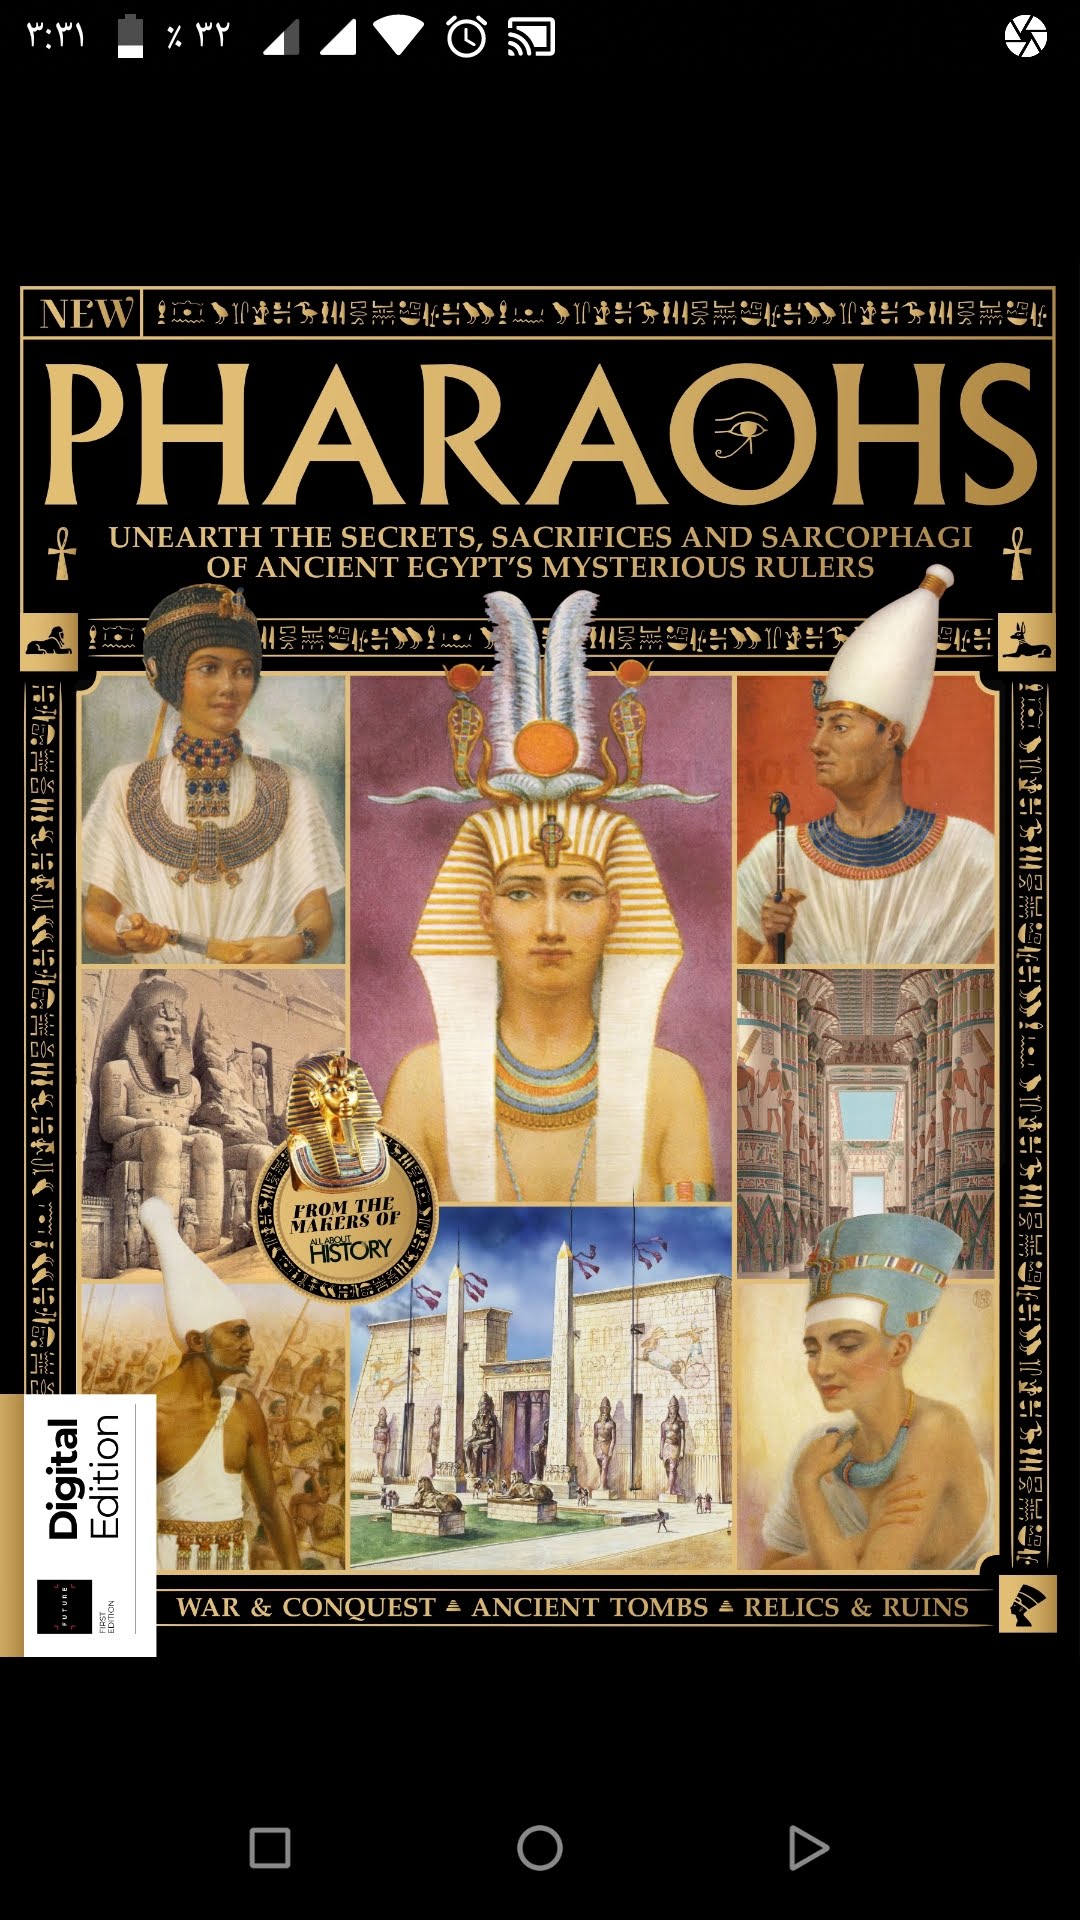 All_About_History_-_Pharaohs_-_2019.jpg